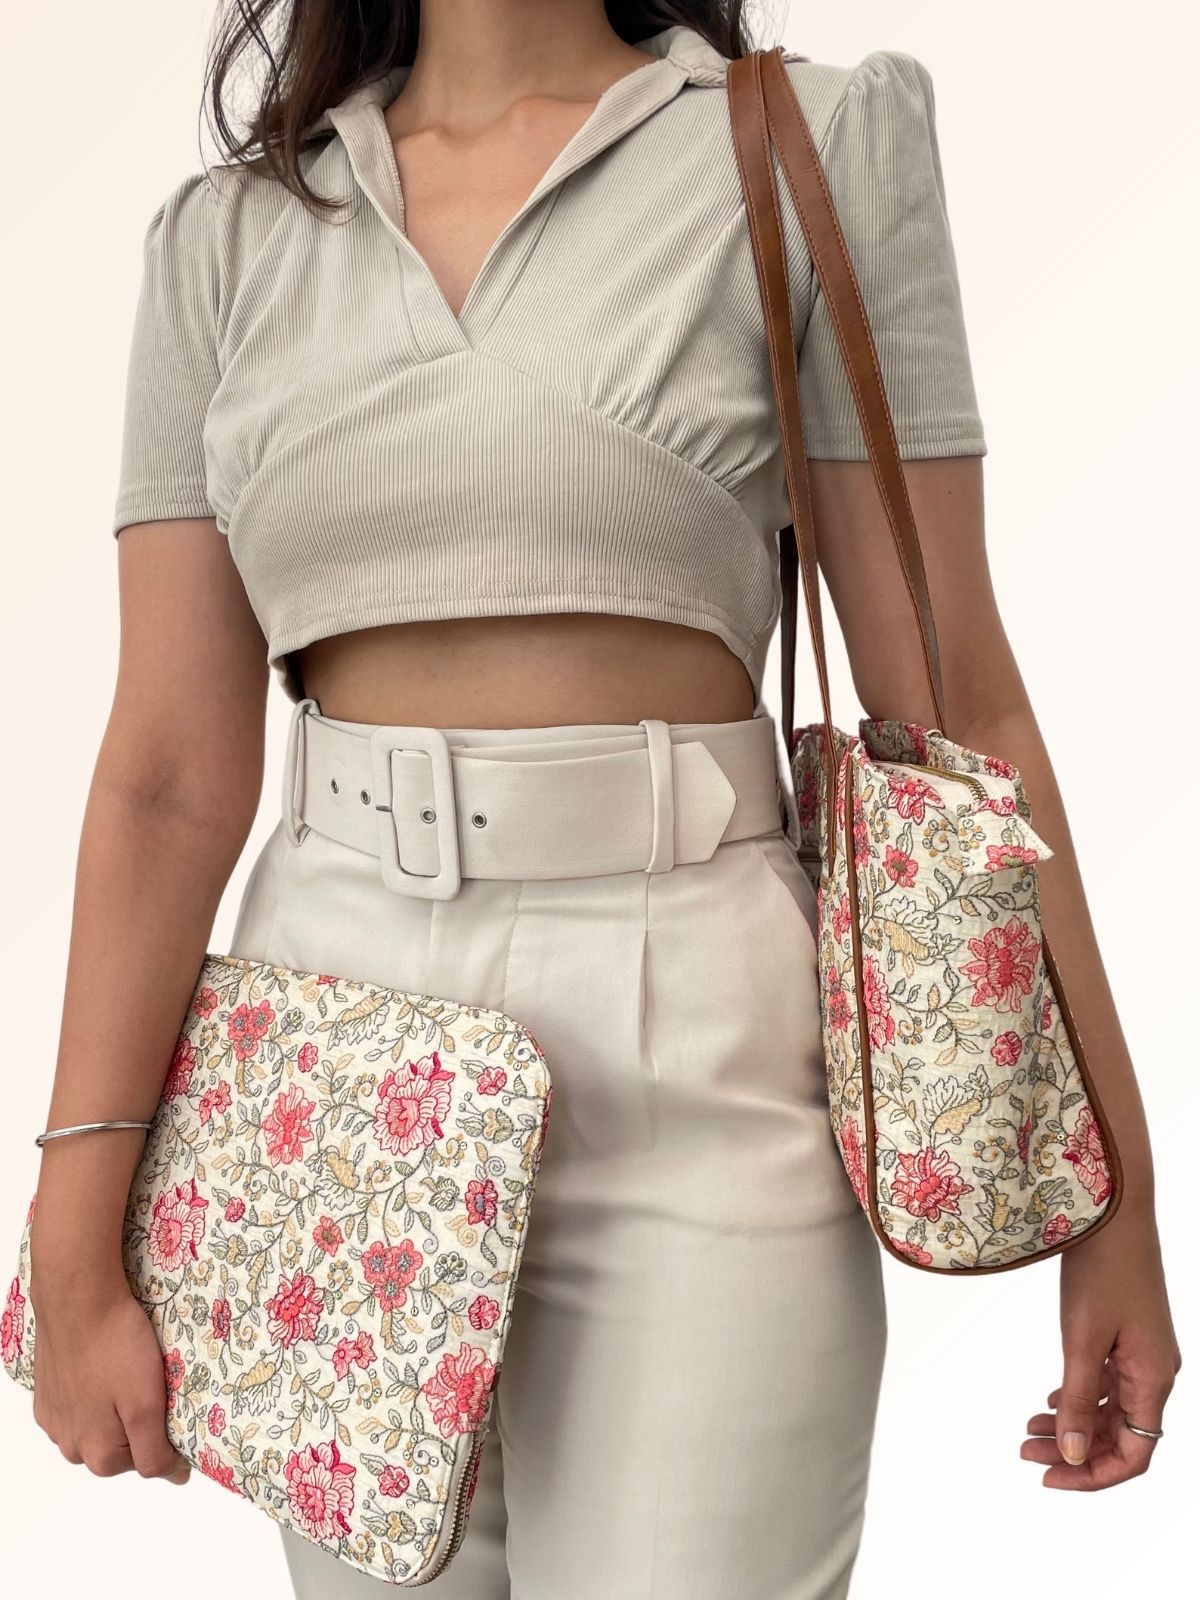 Ivy floral embroidered Tote bag